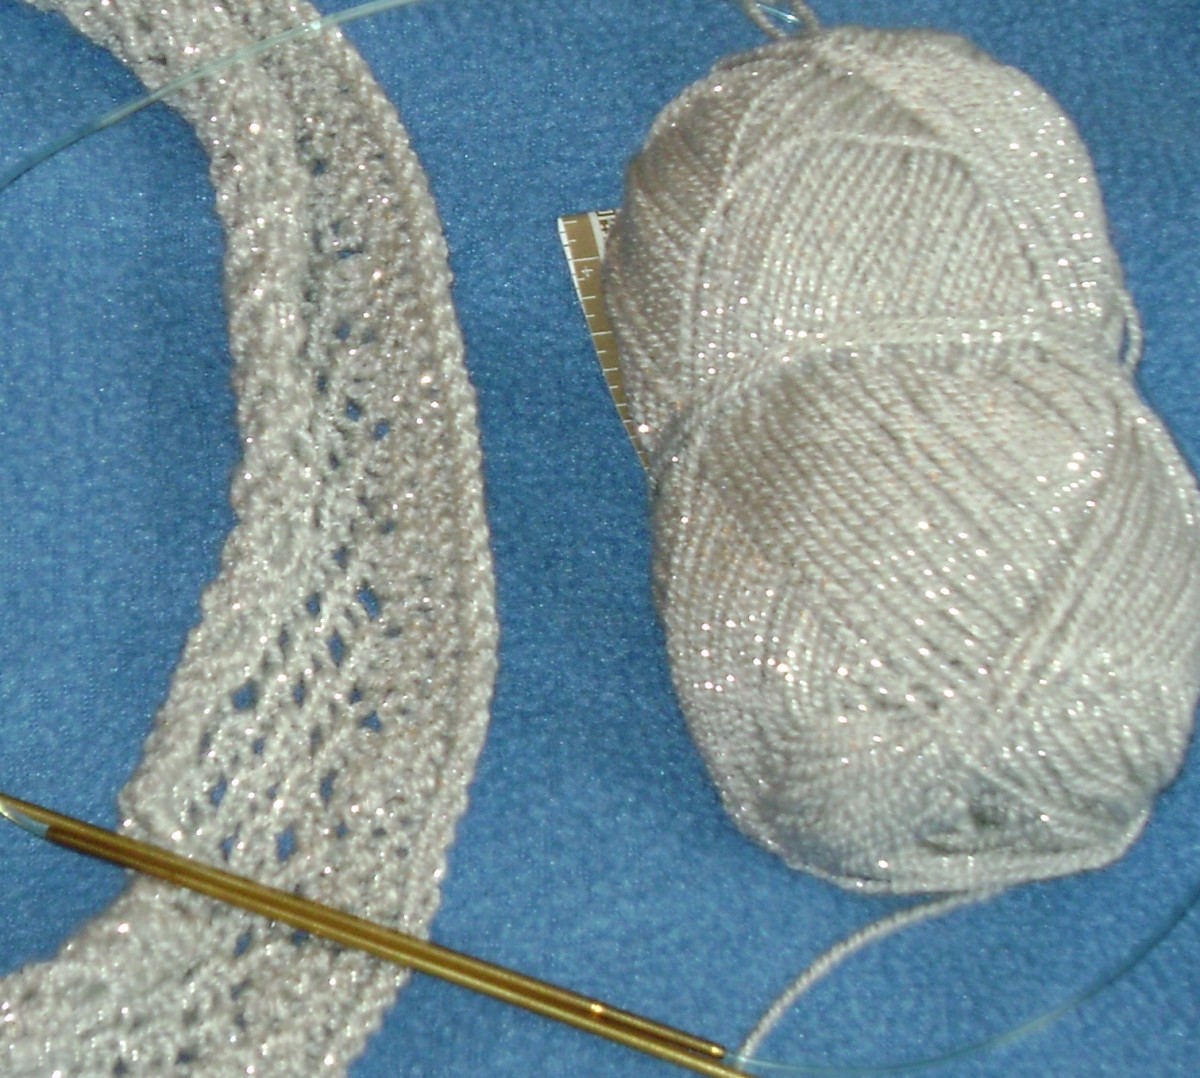 Mithril Lace in Vanna's Glamour yarn